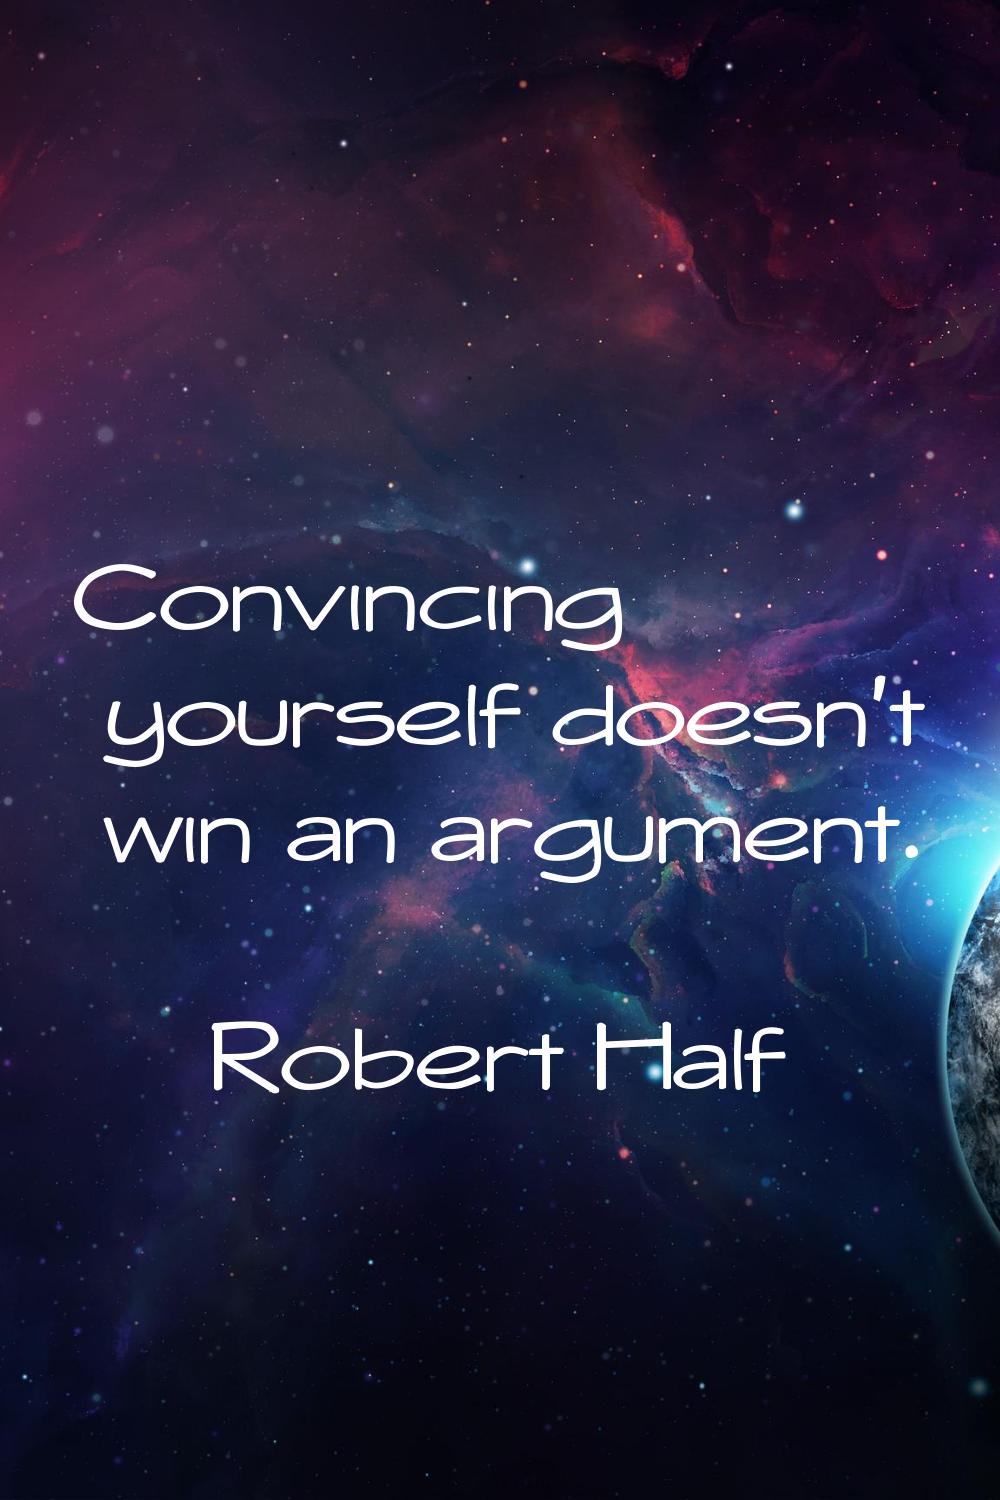 Convincing yourself doesn't win an argument.